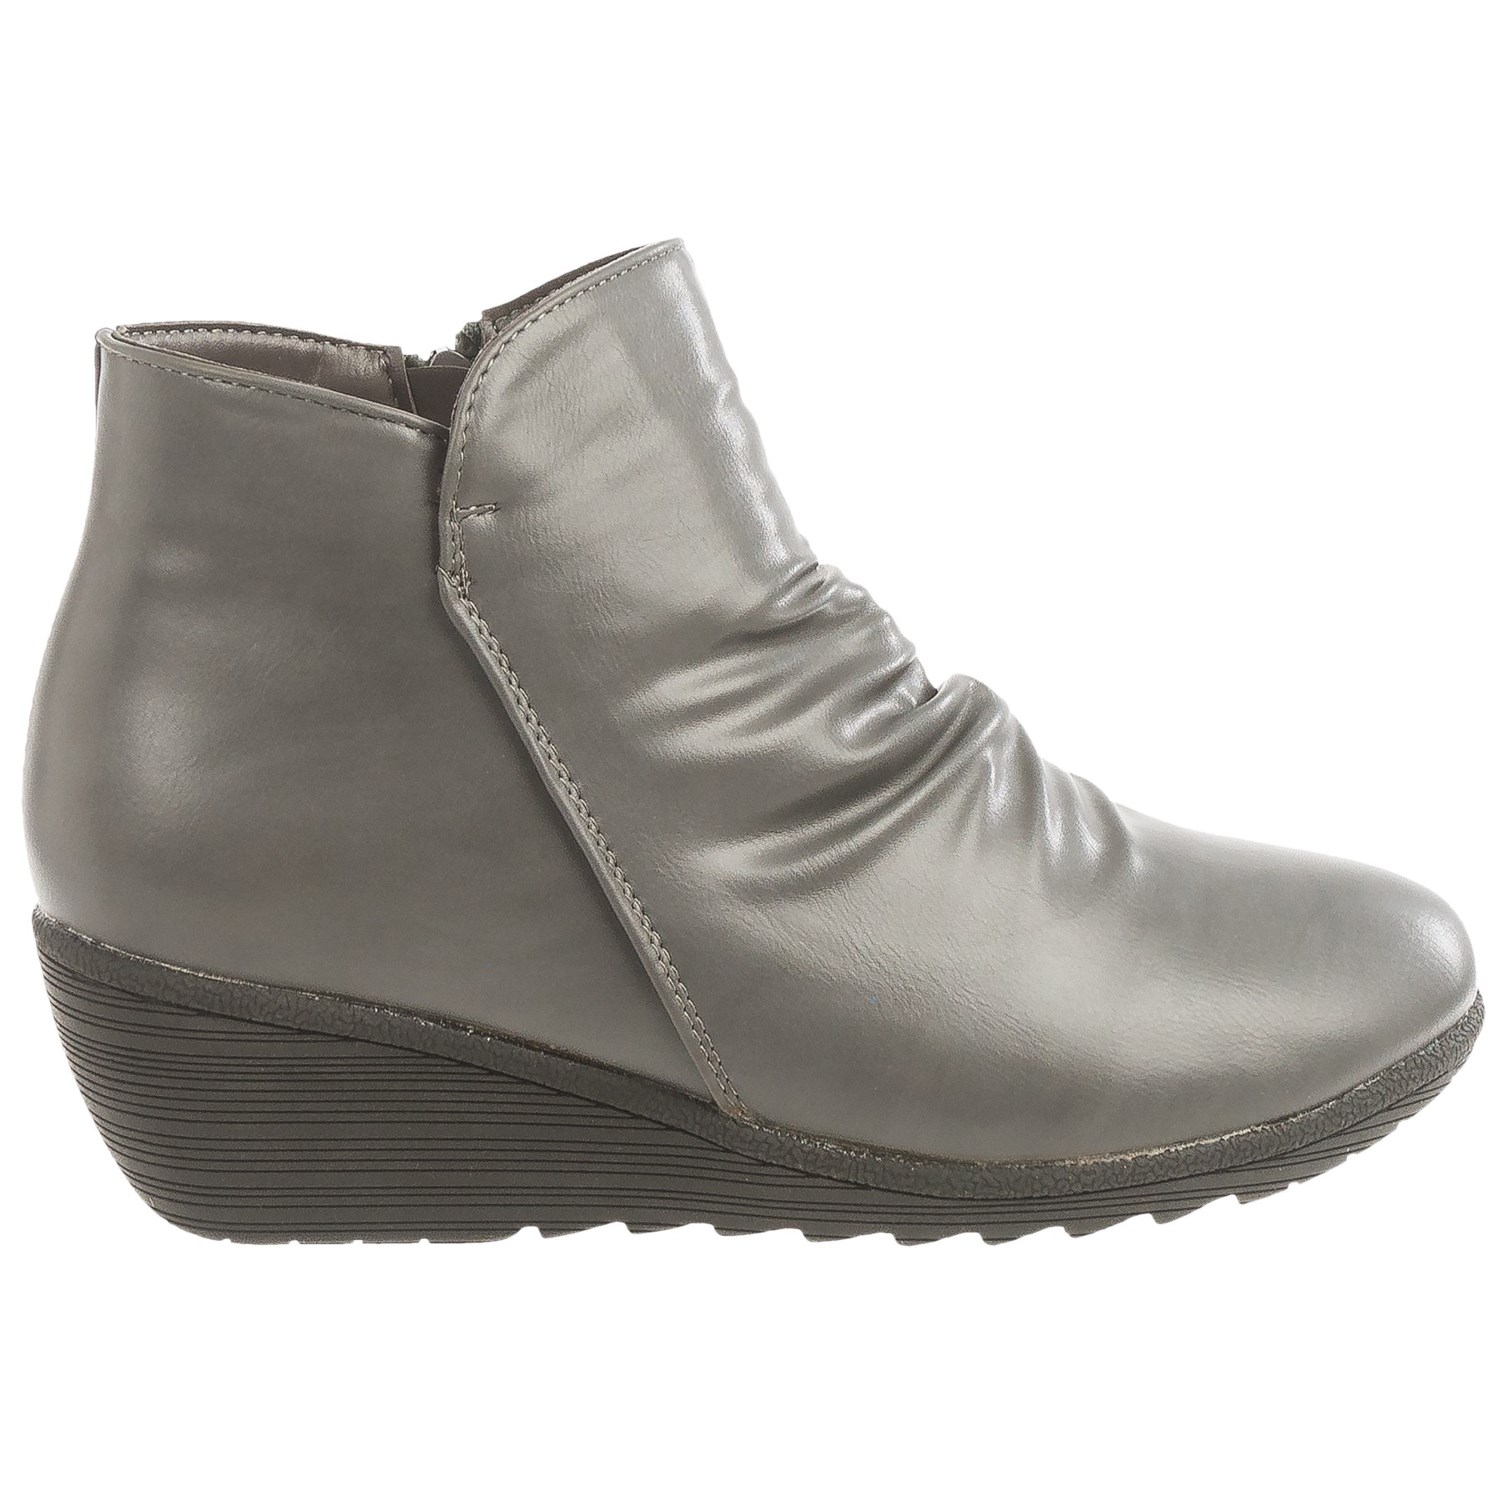 Serene Chiaral Ankle Boots (For Women) - Save 44%